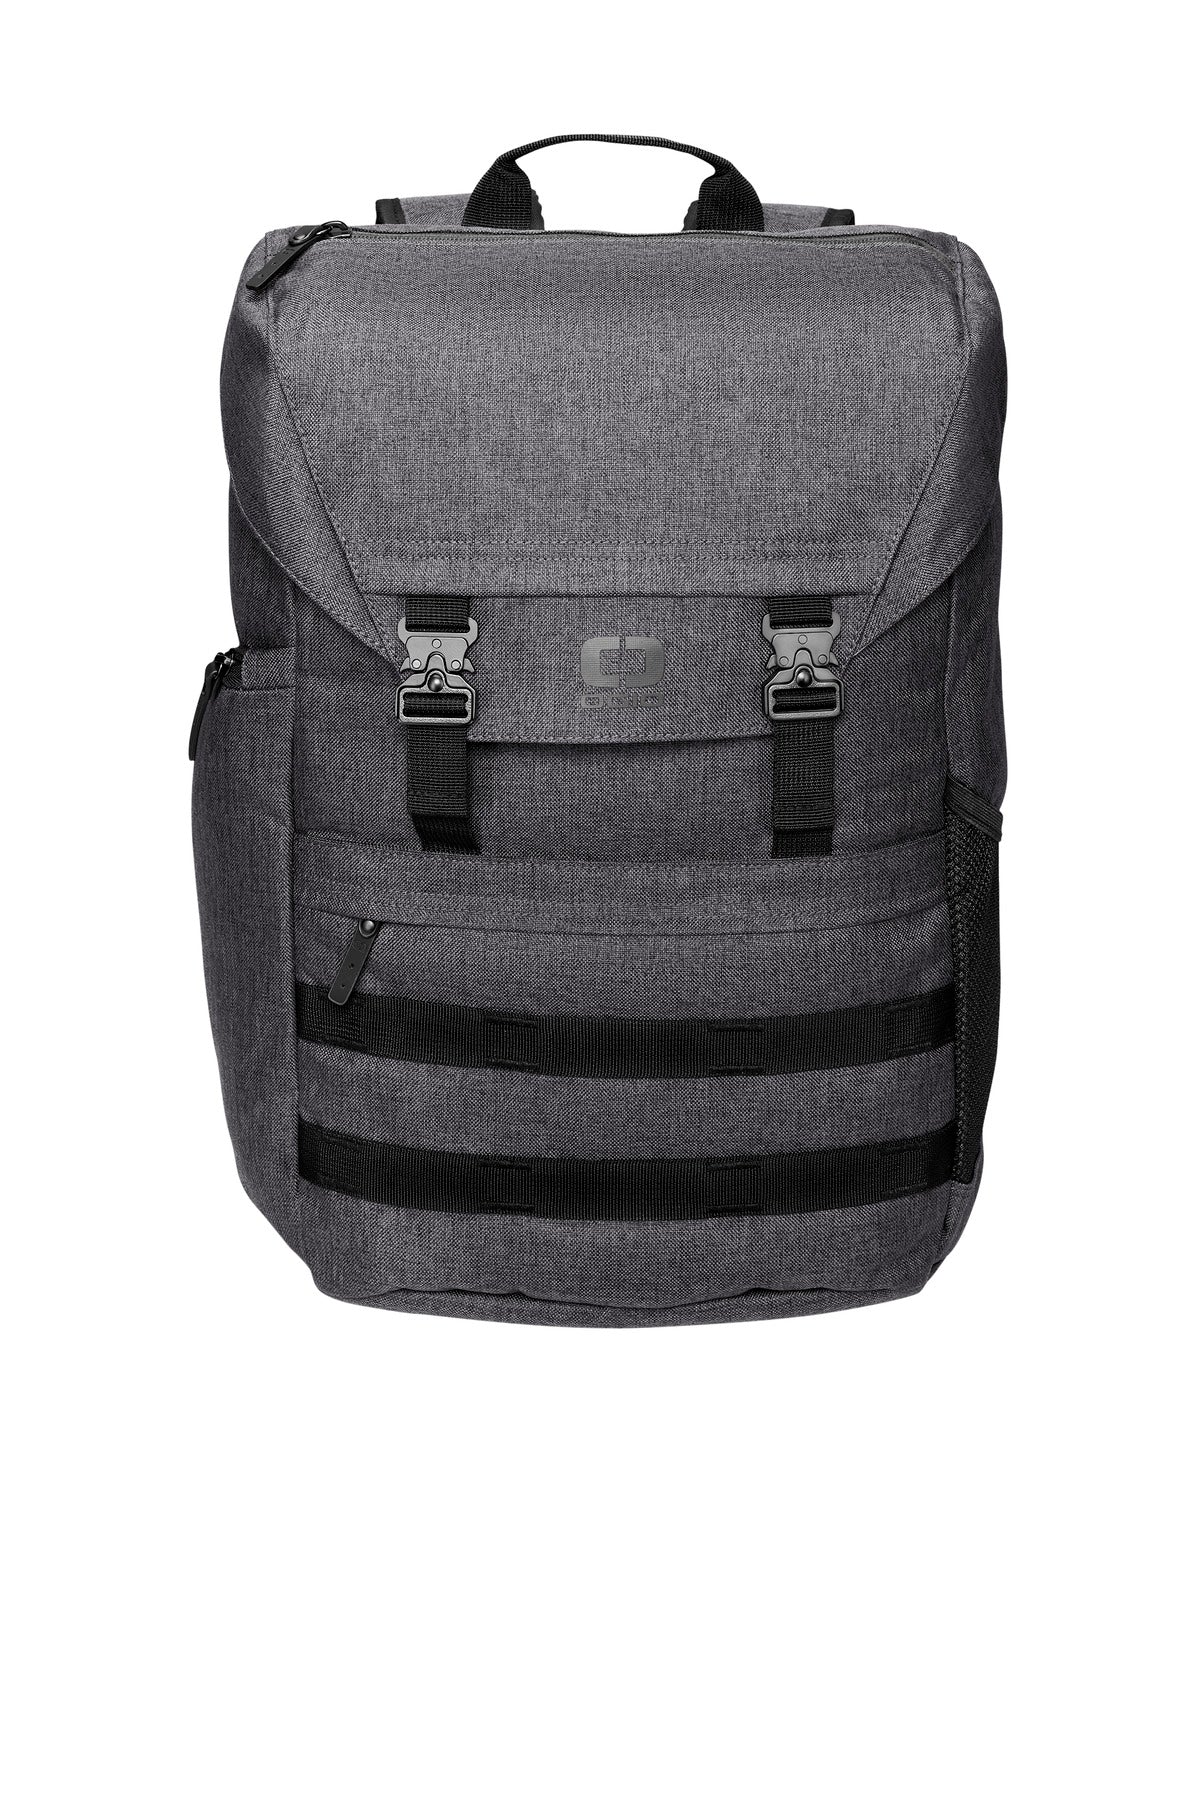 OGIO® Command Pack 91019